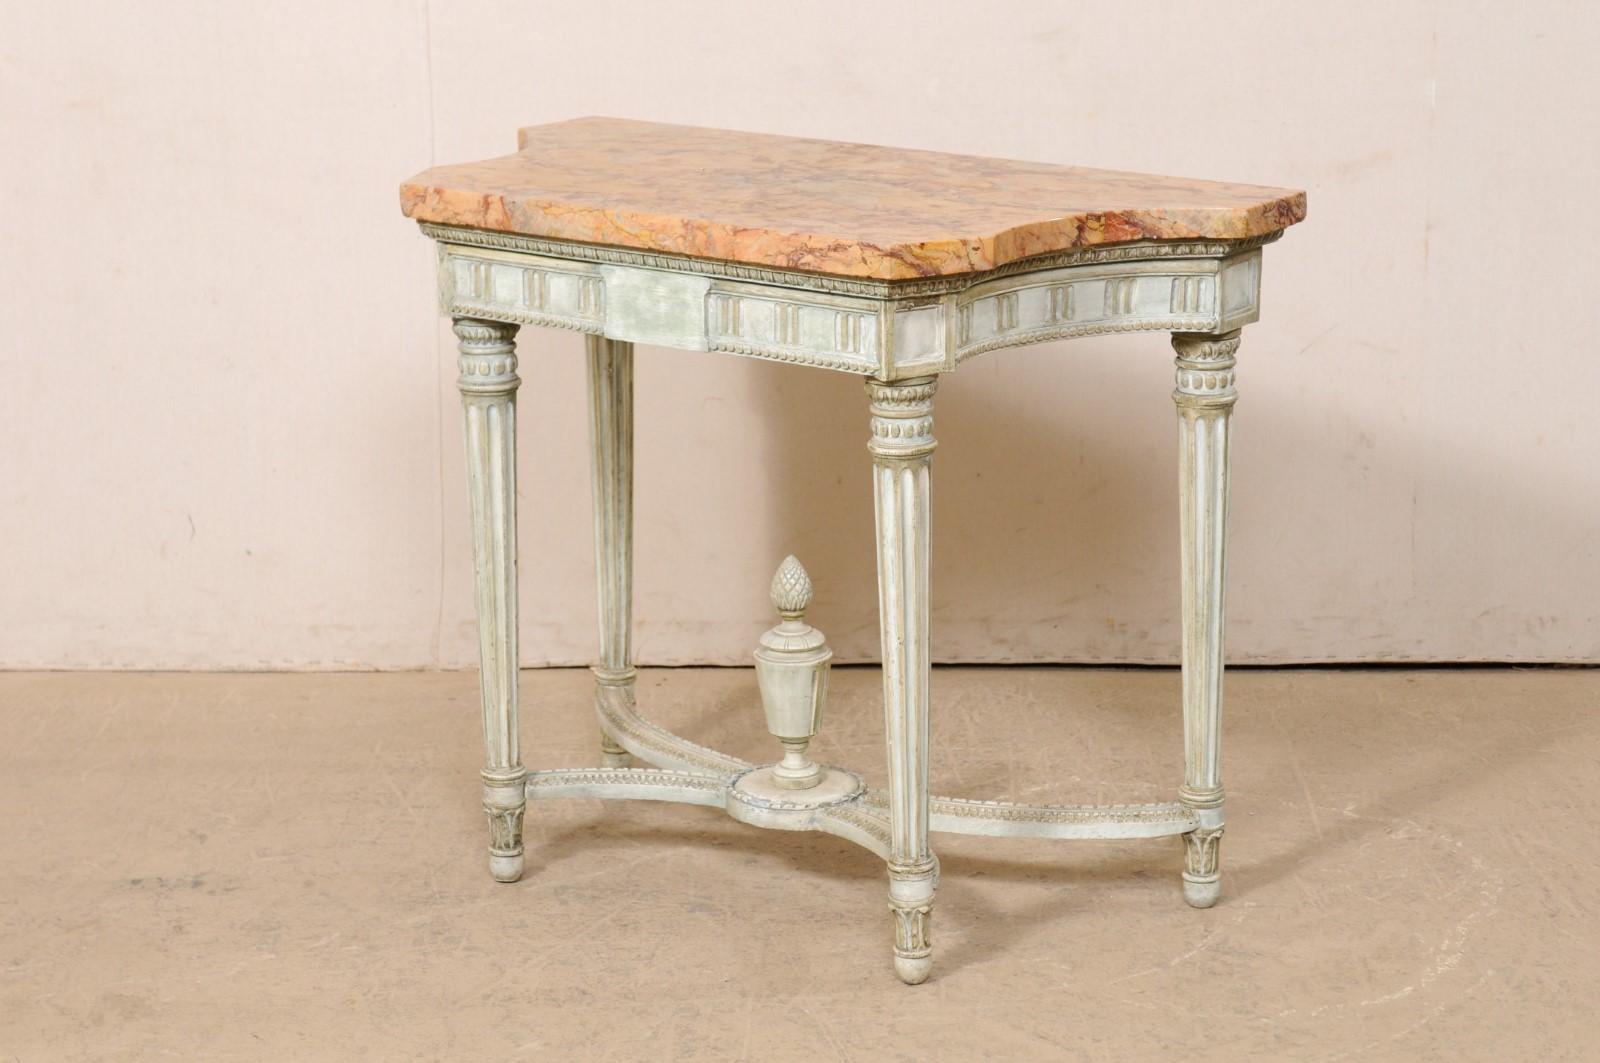 French Neoclassic Period Marble Top Console w/Carved Urn Finial at Underside For Sale 5